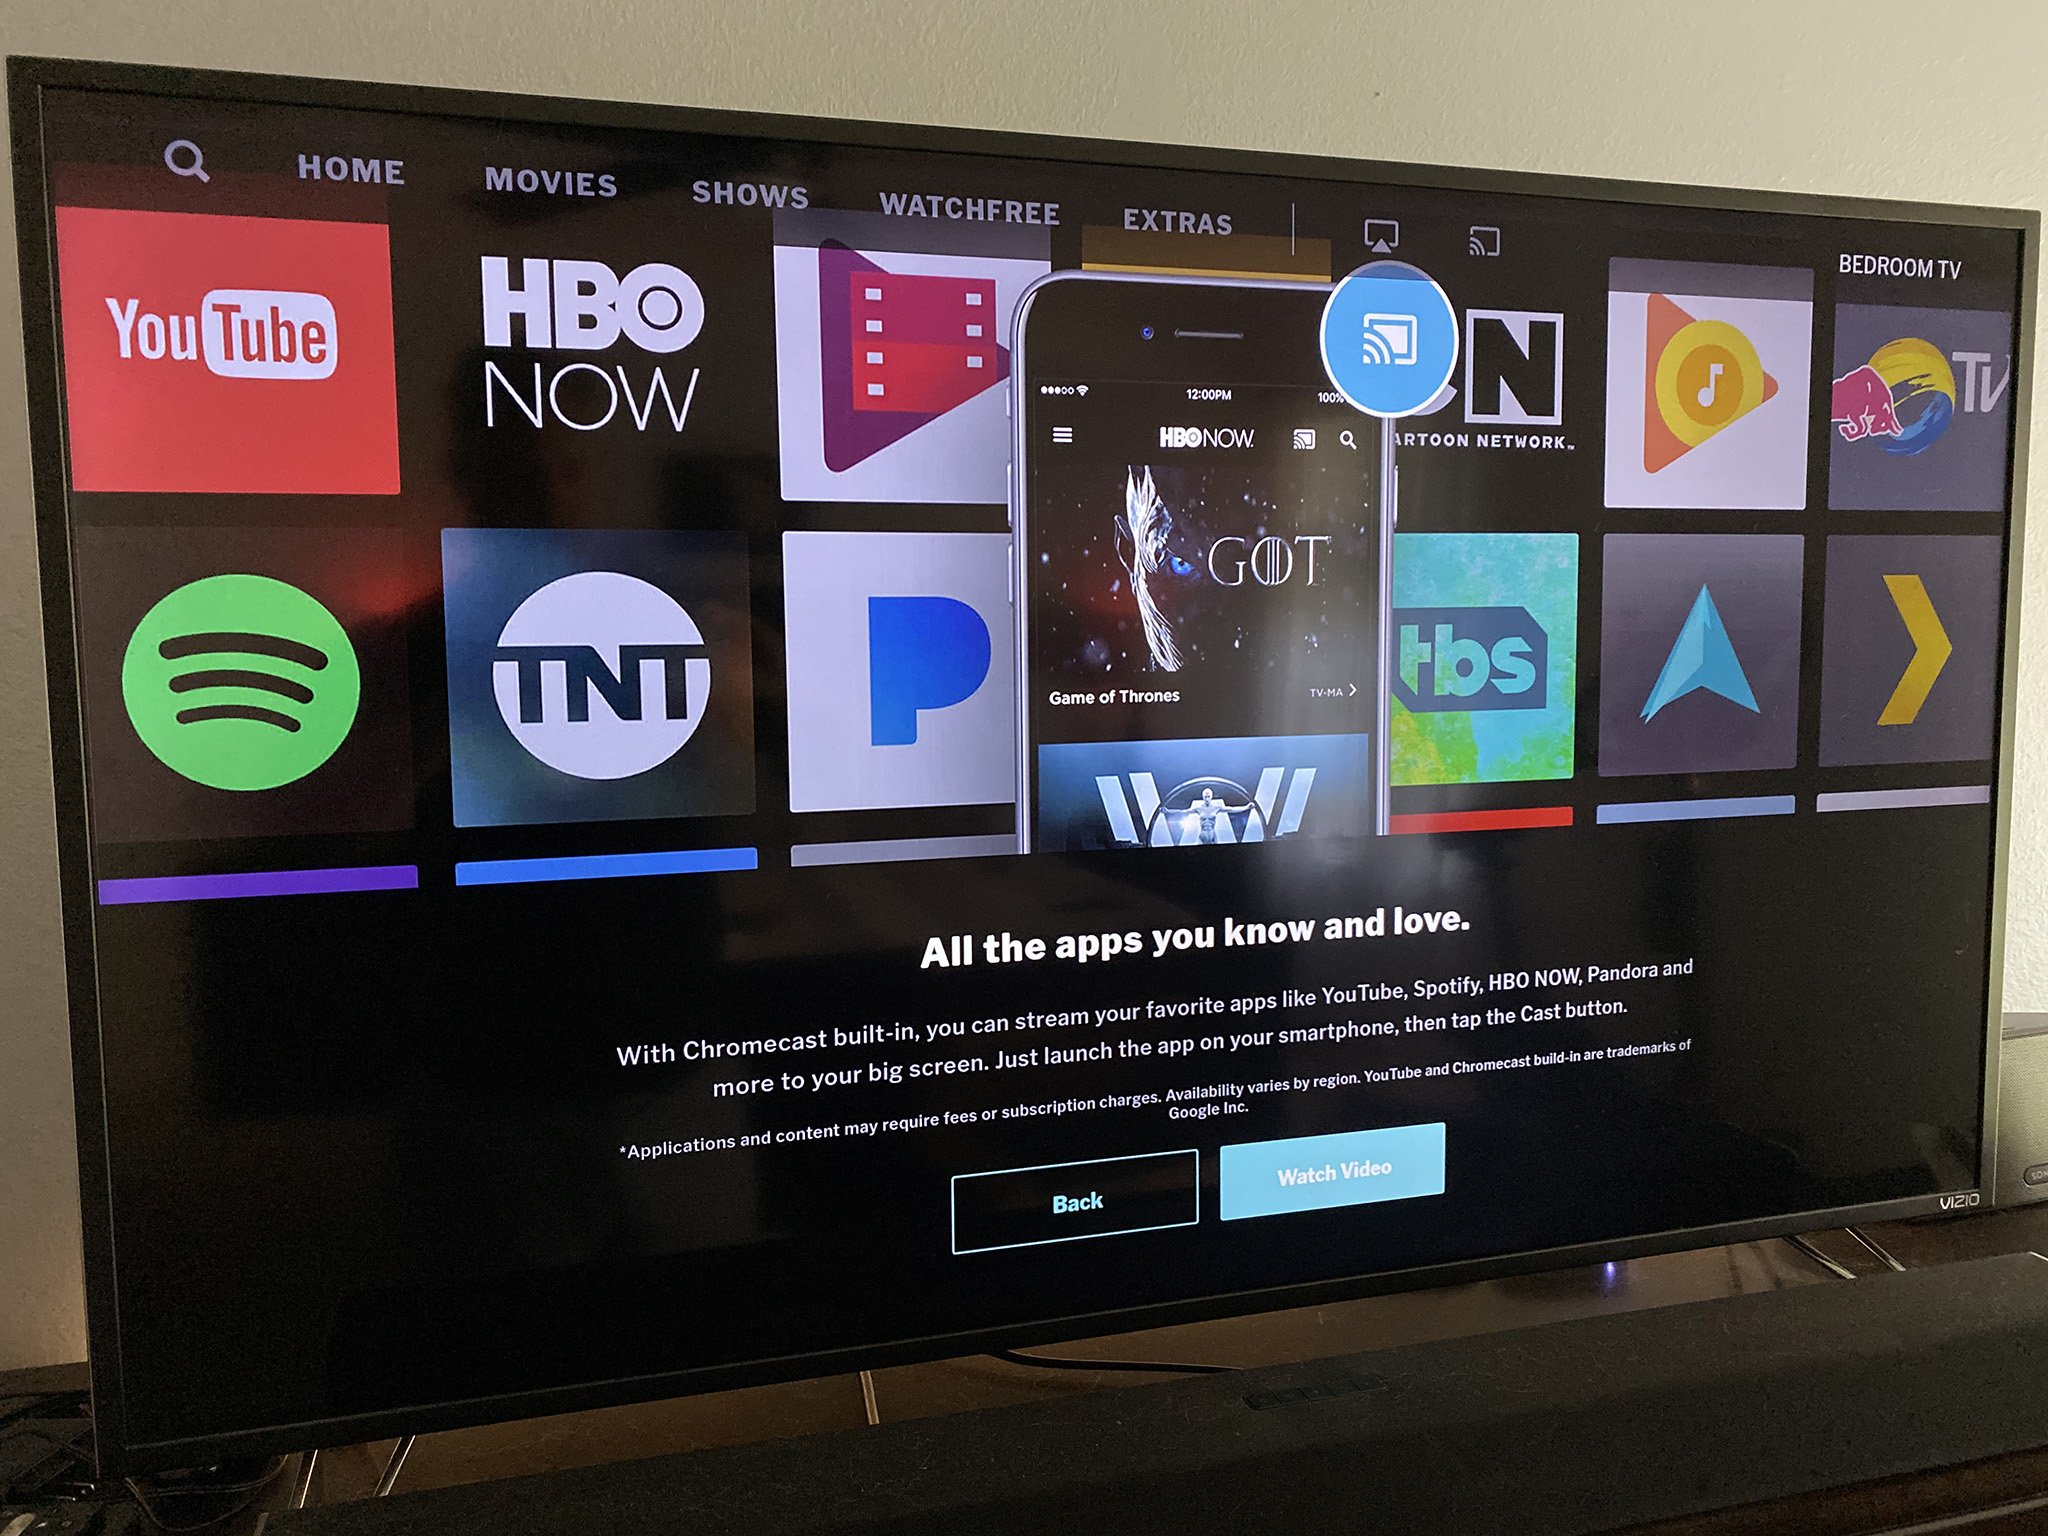 Is Dazn Available On Vizio Tvs What To Watch